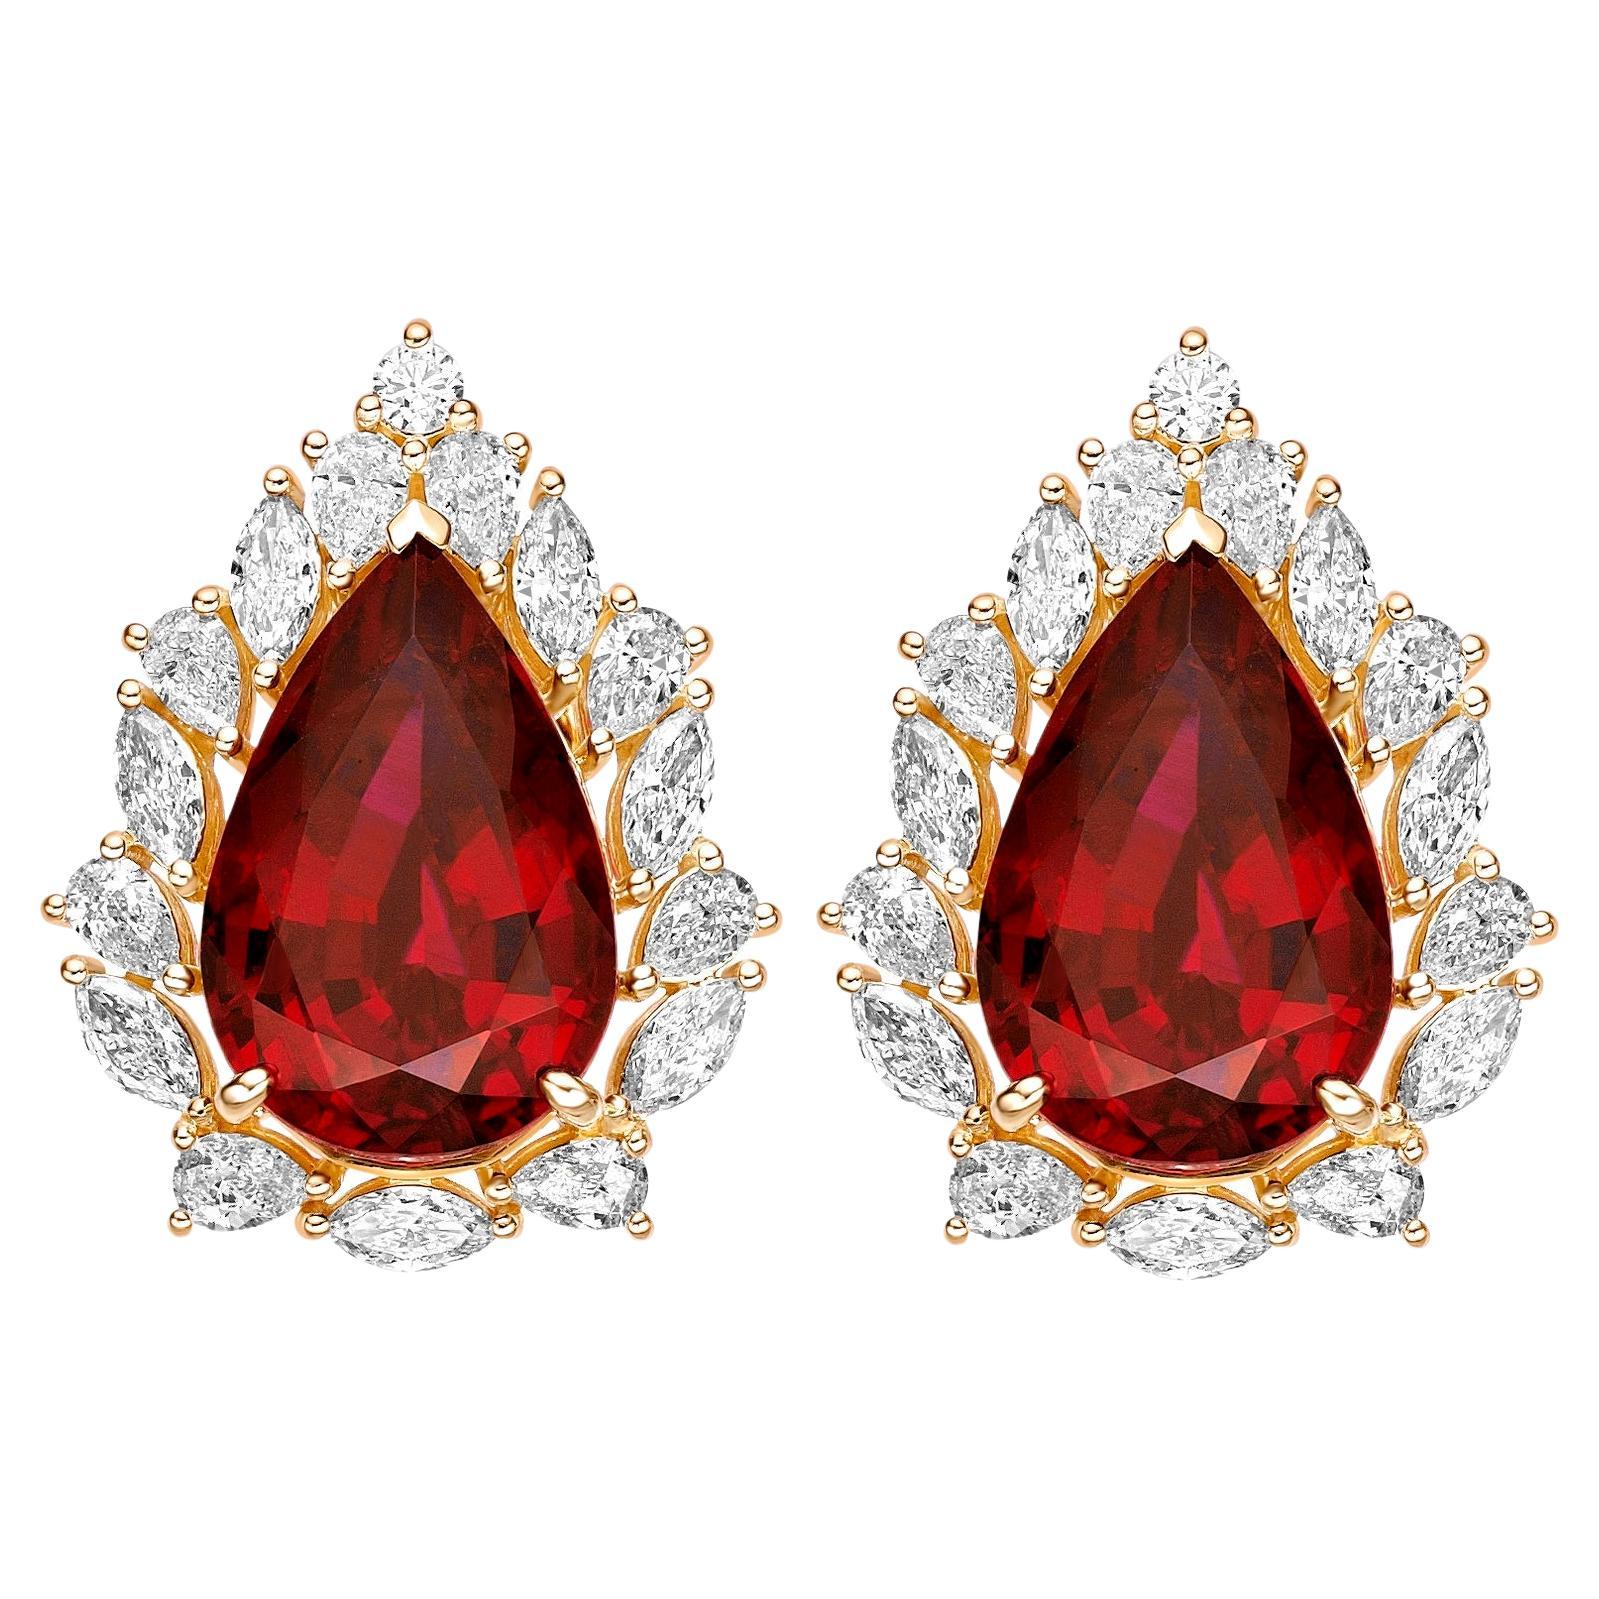 20.955 Carat Rubellite Stud Earrings in 18Karat Yellow Gold with White Diamond. For Sale